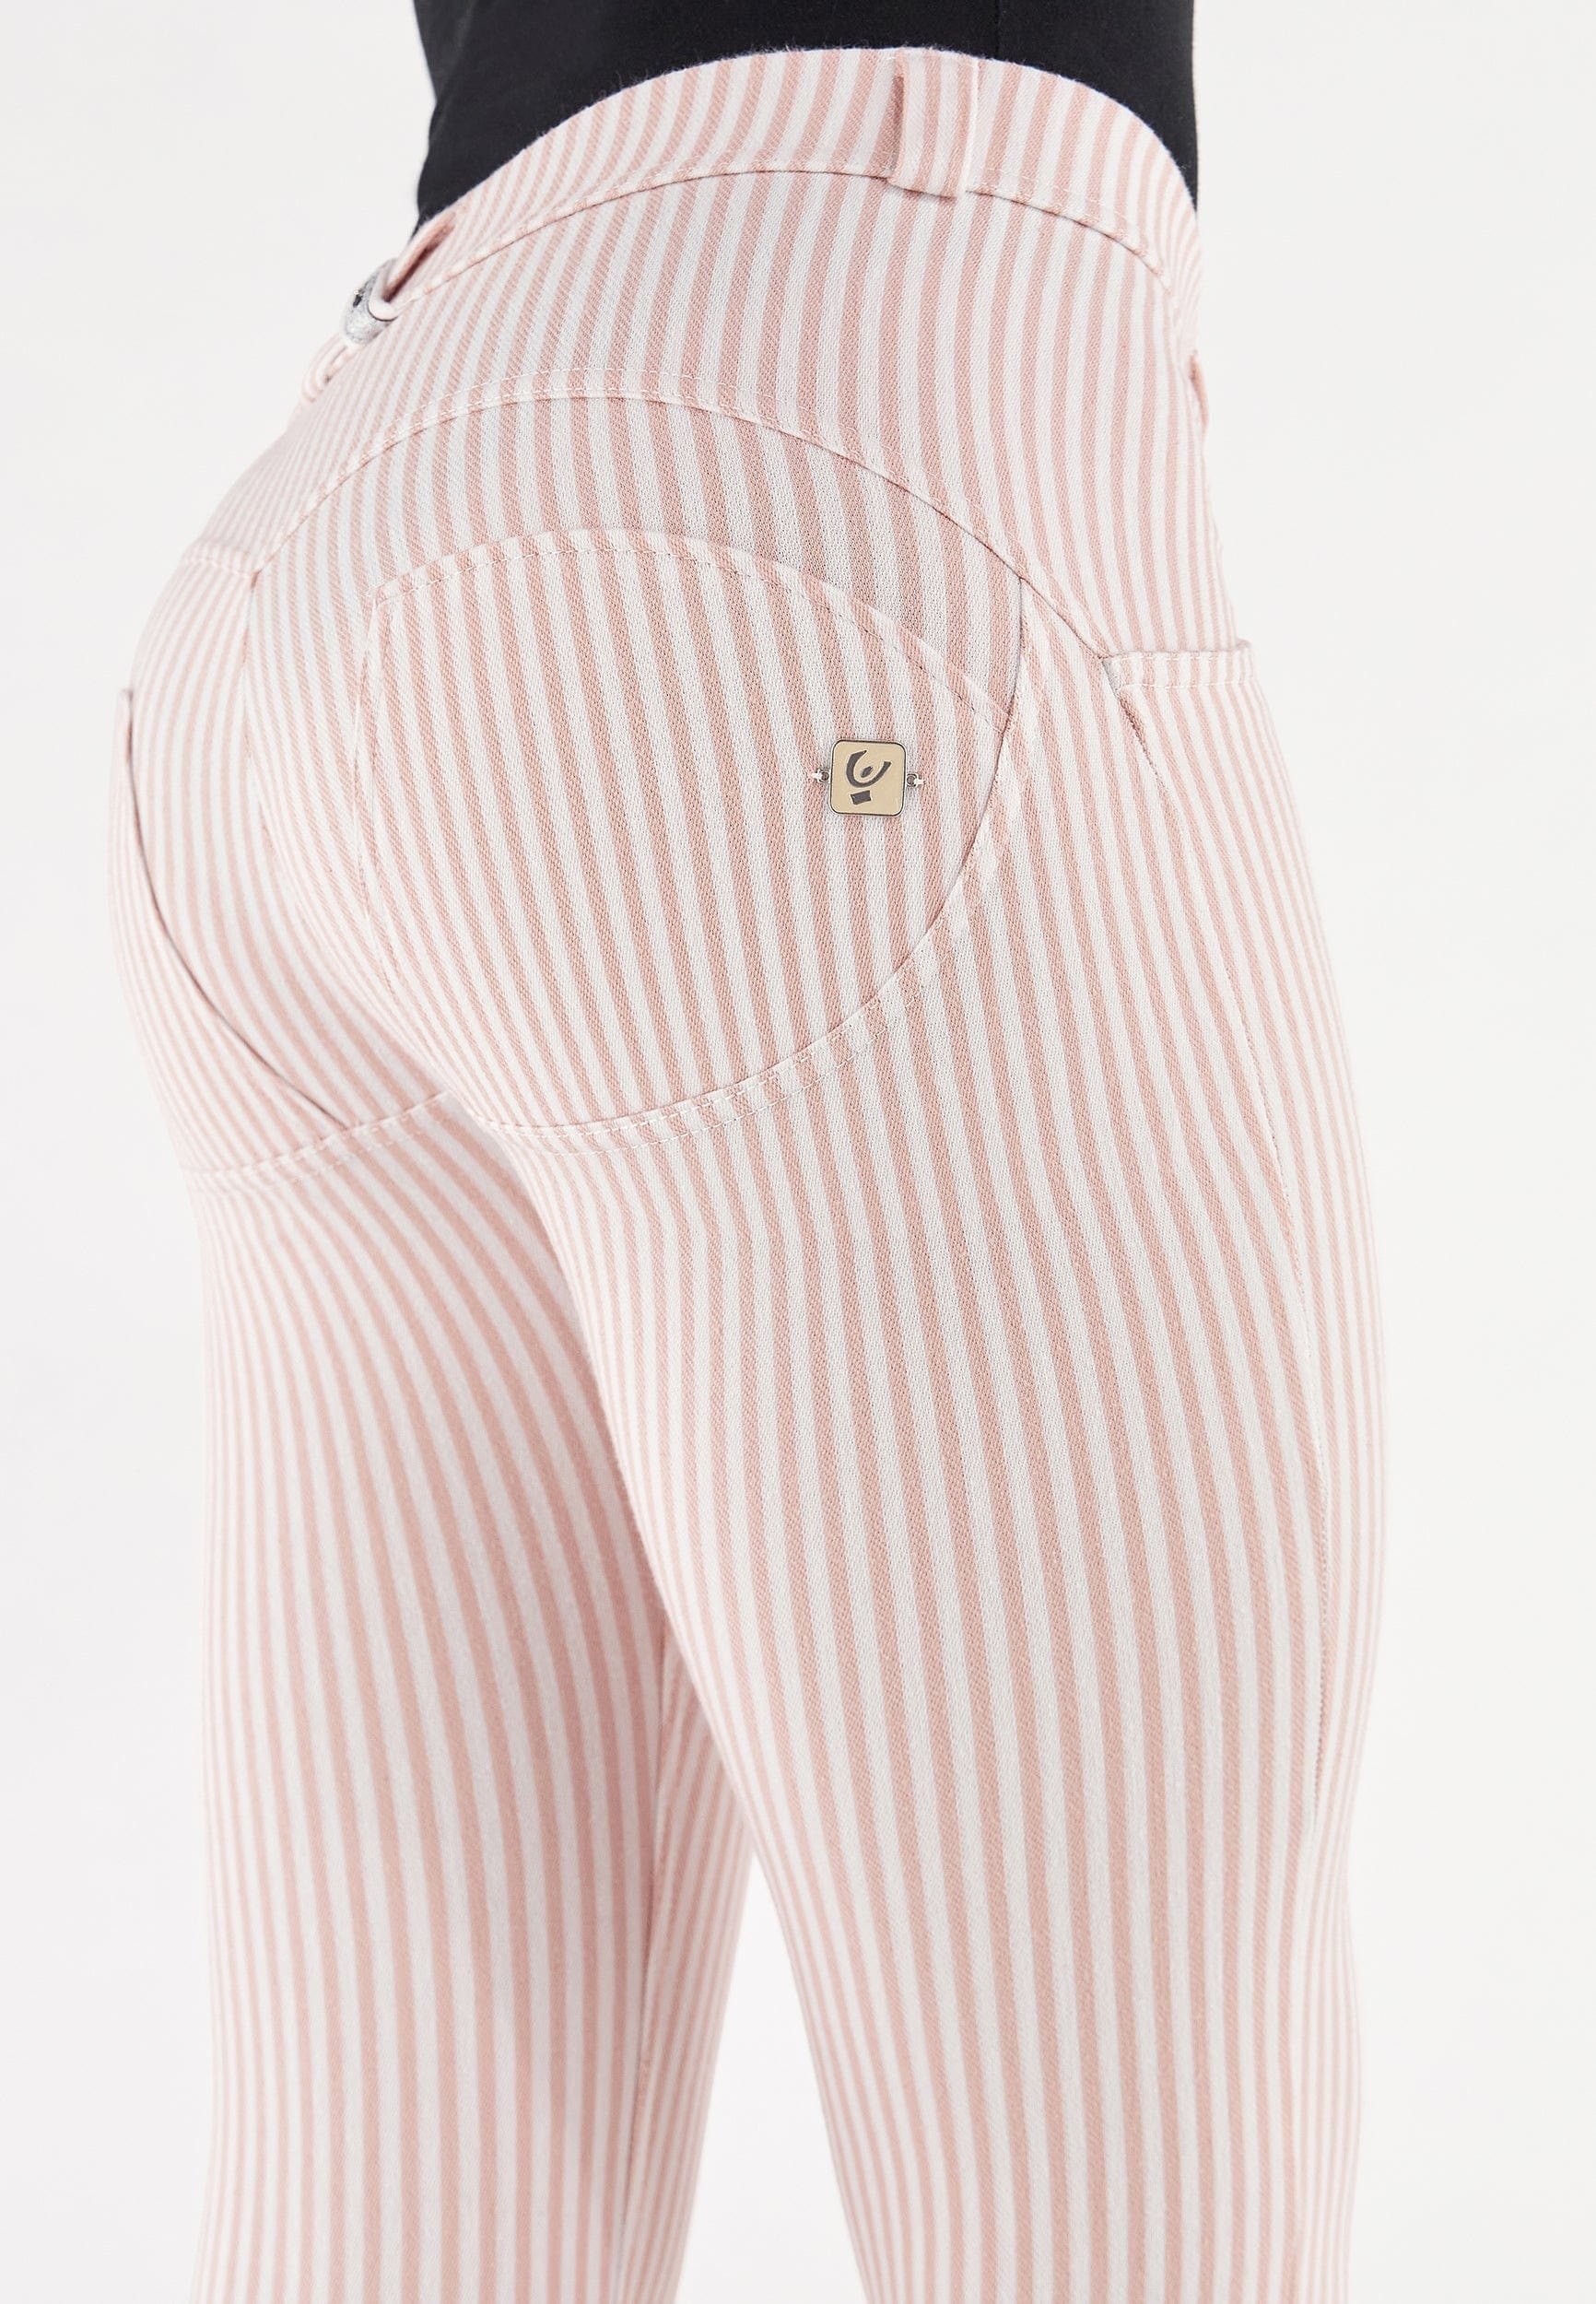 WR.UP® Fashion - Mid Rise - 7/8 Length - Pink + White Stripes 3